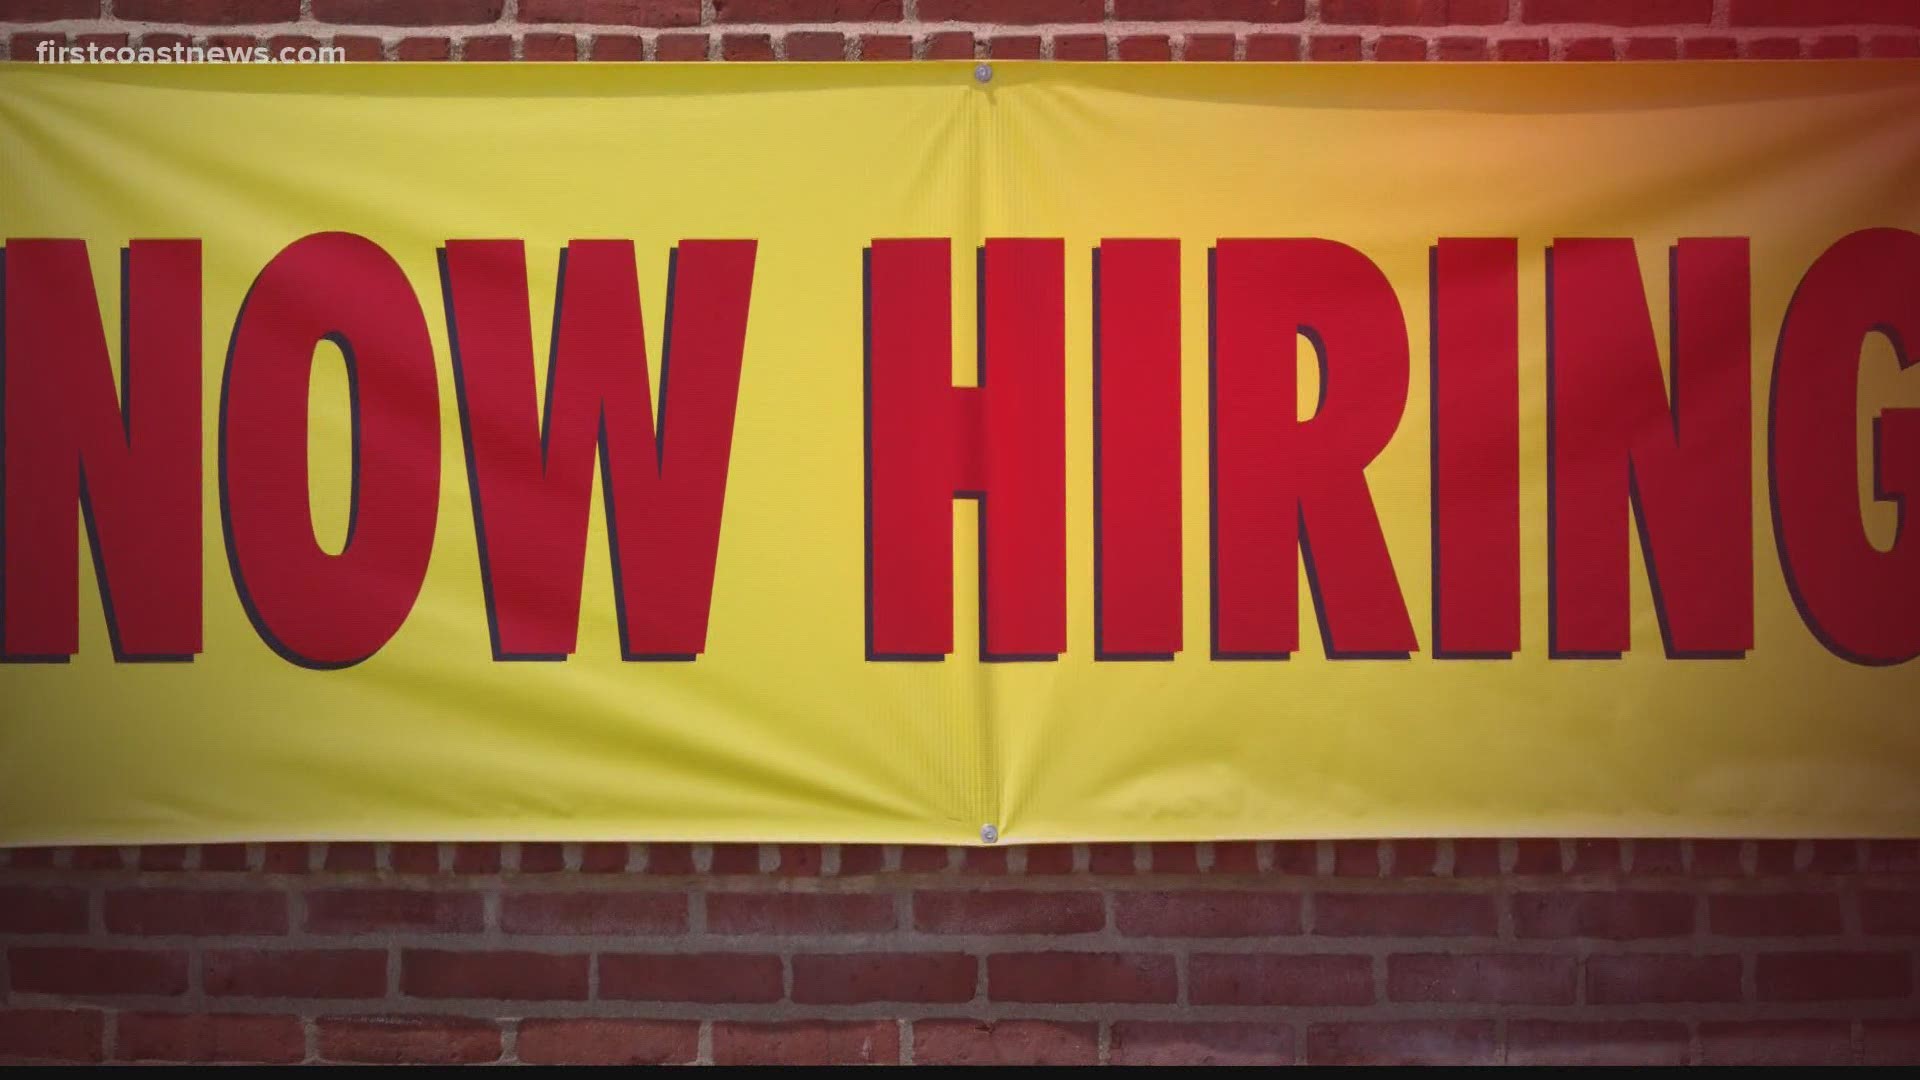 First Coast News' Anthony Austin is searching for job openings for those who need work. Here's a look at who's hiring this right now (May 8, 2020)